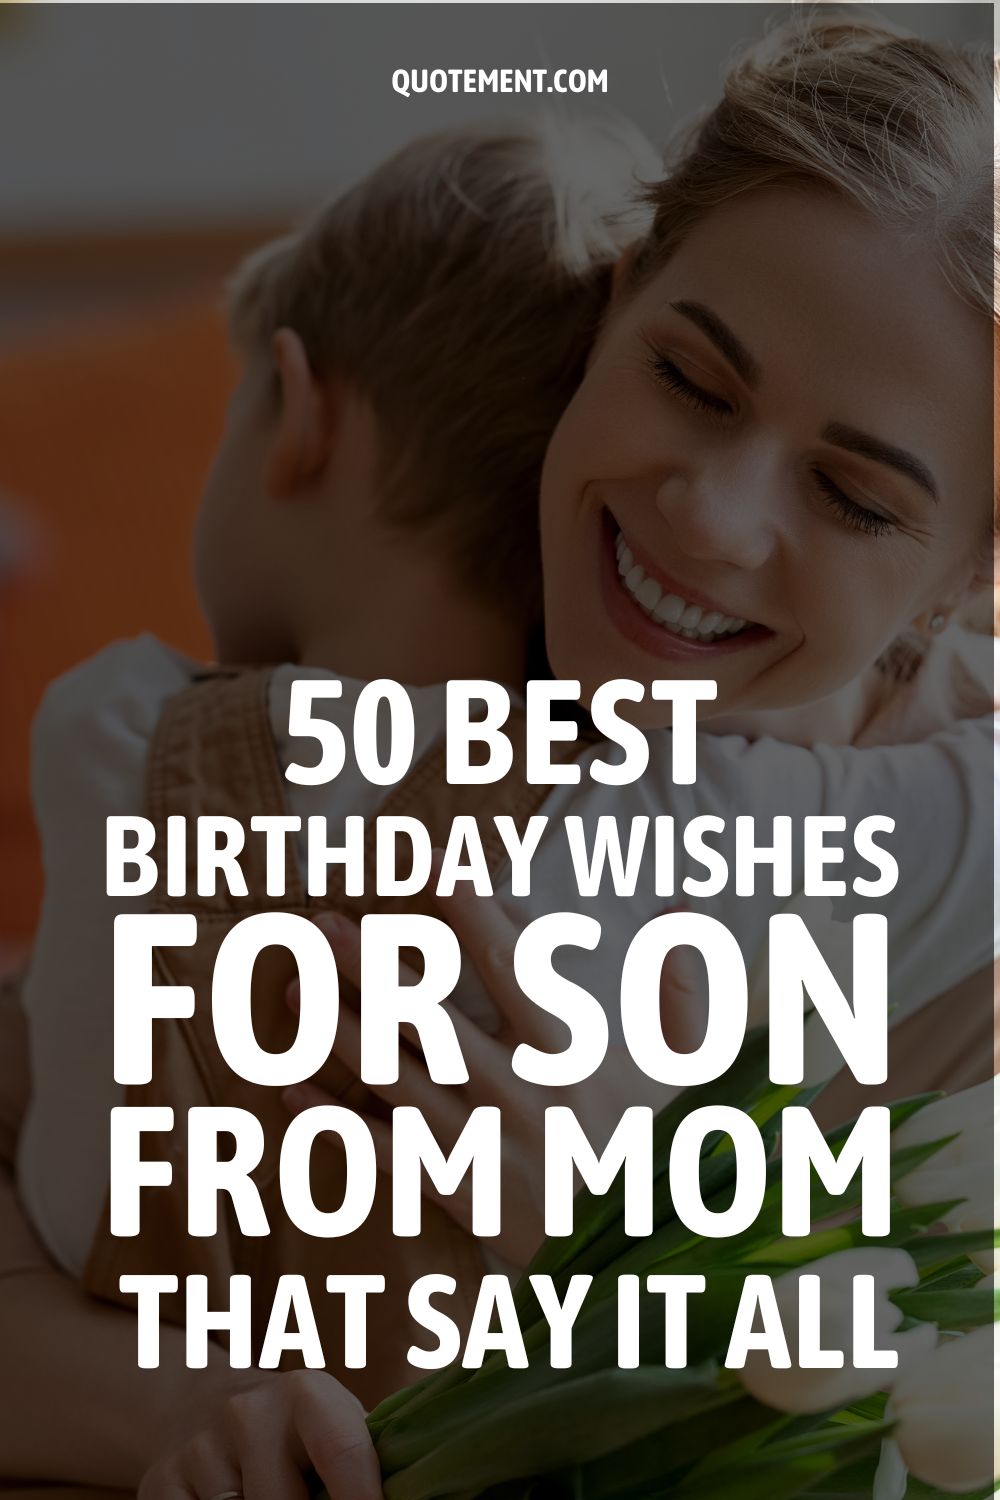 50 Best Birthday Wishes For Son From Mom That Say It All 